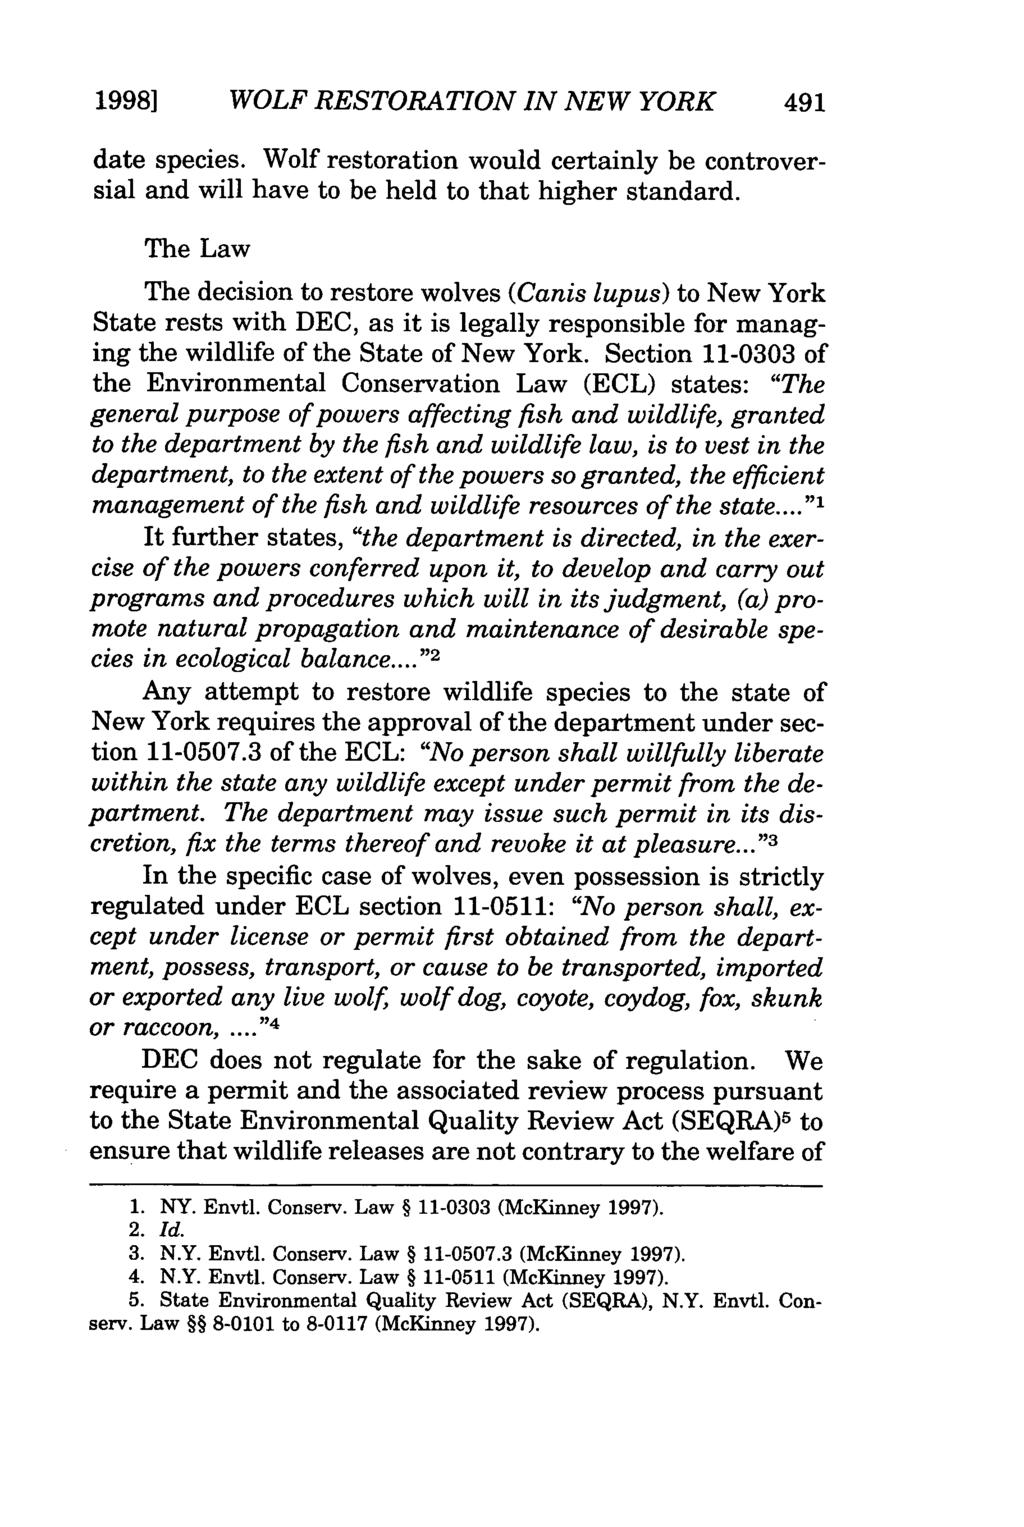 19981 WOLF RESTORATION IN NEW YORK date species. Wolf restoration would certainly be controversial and will have to be held to that higher standard.